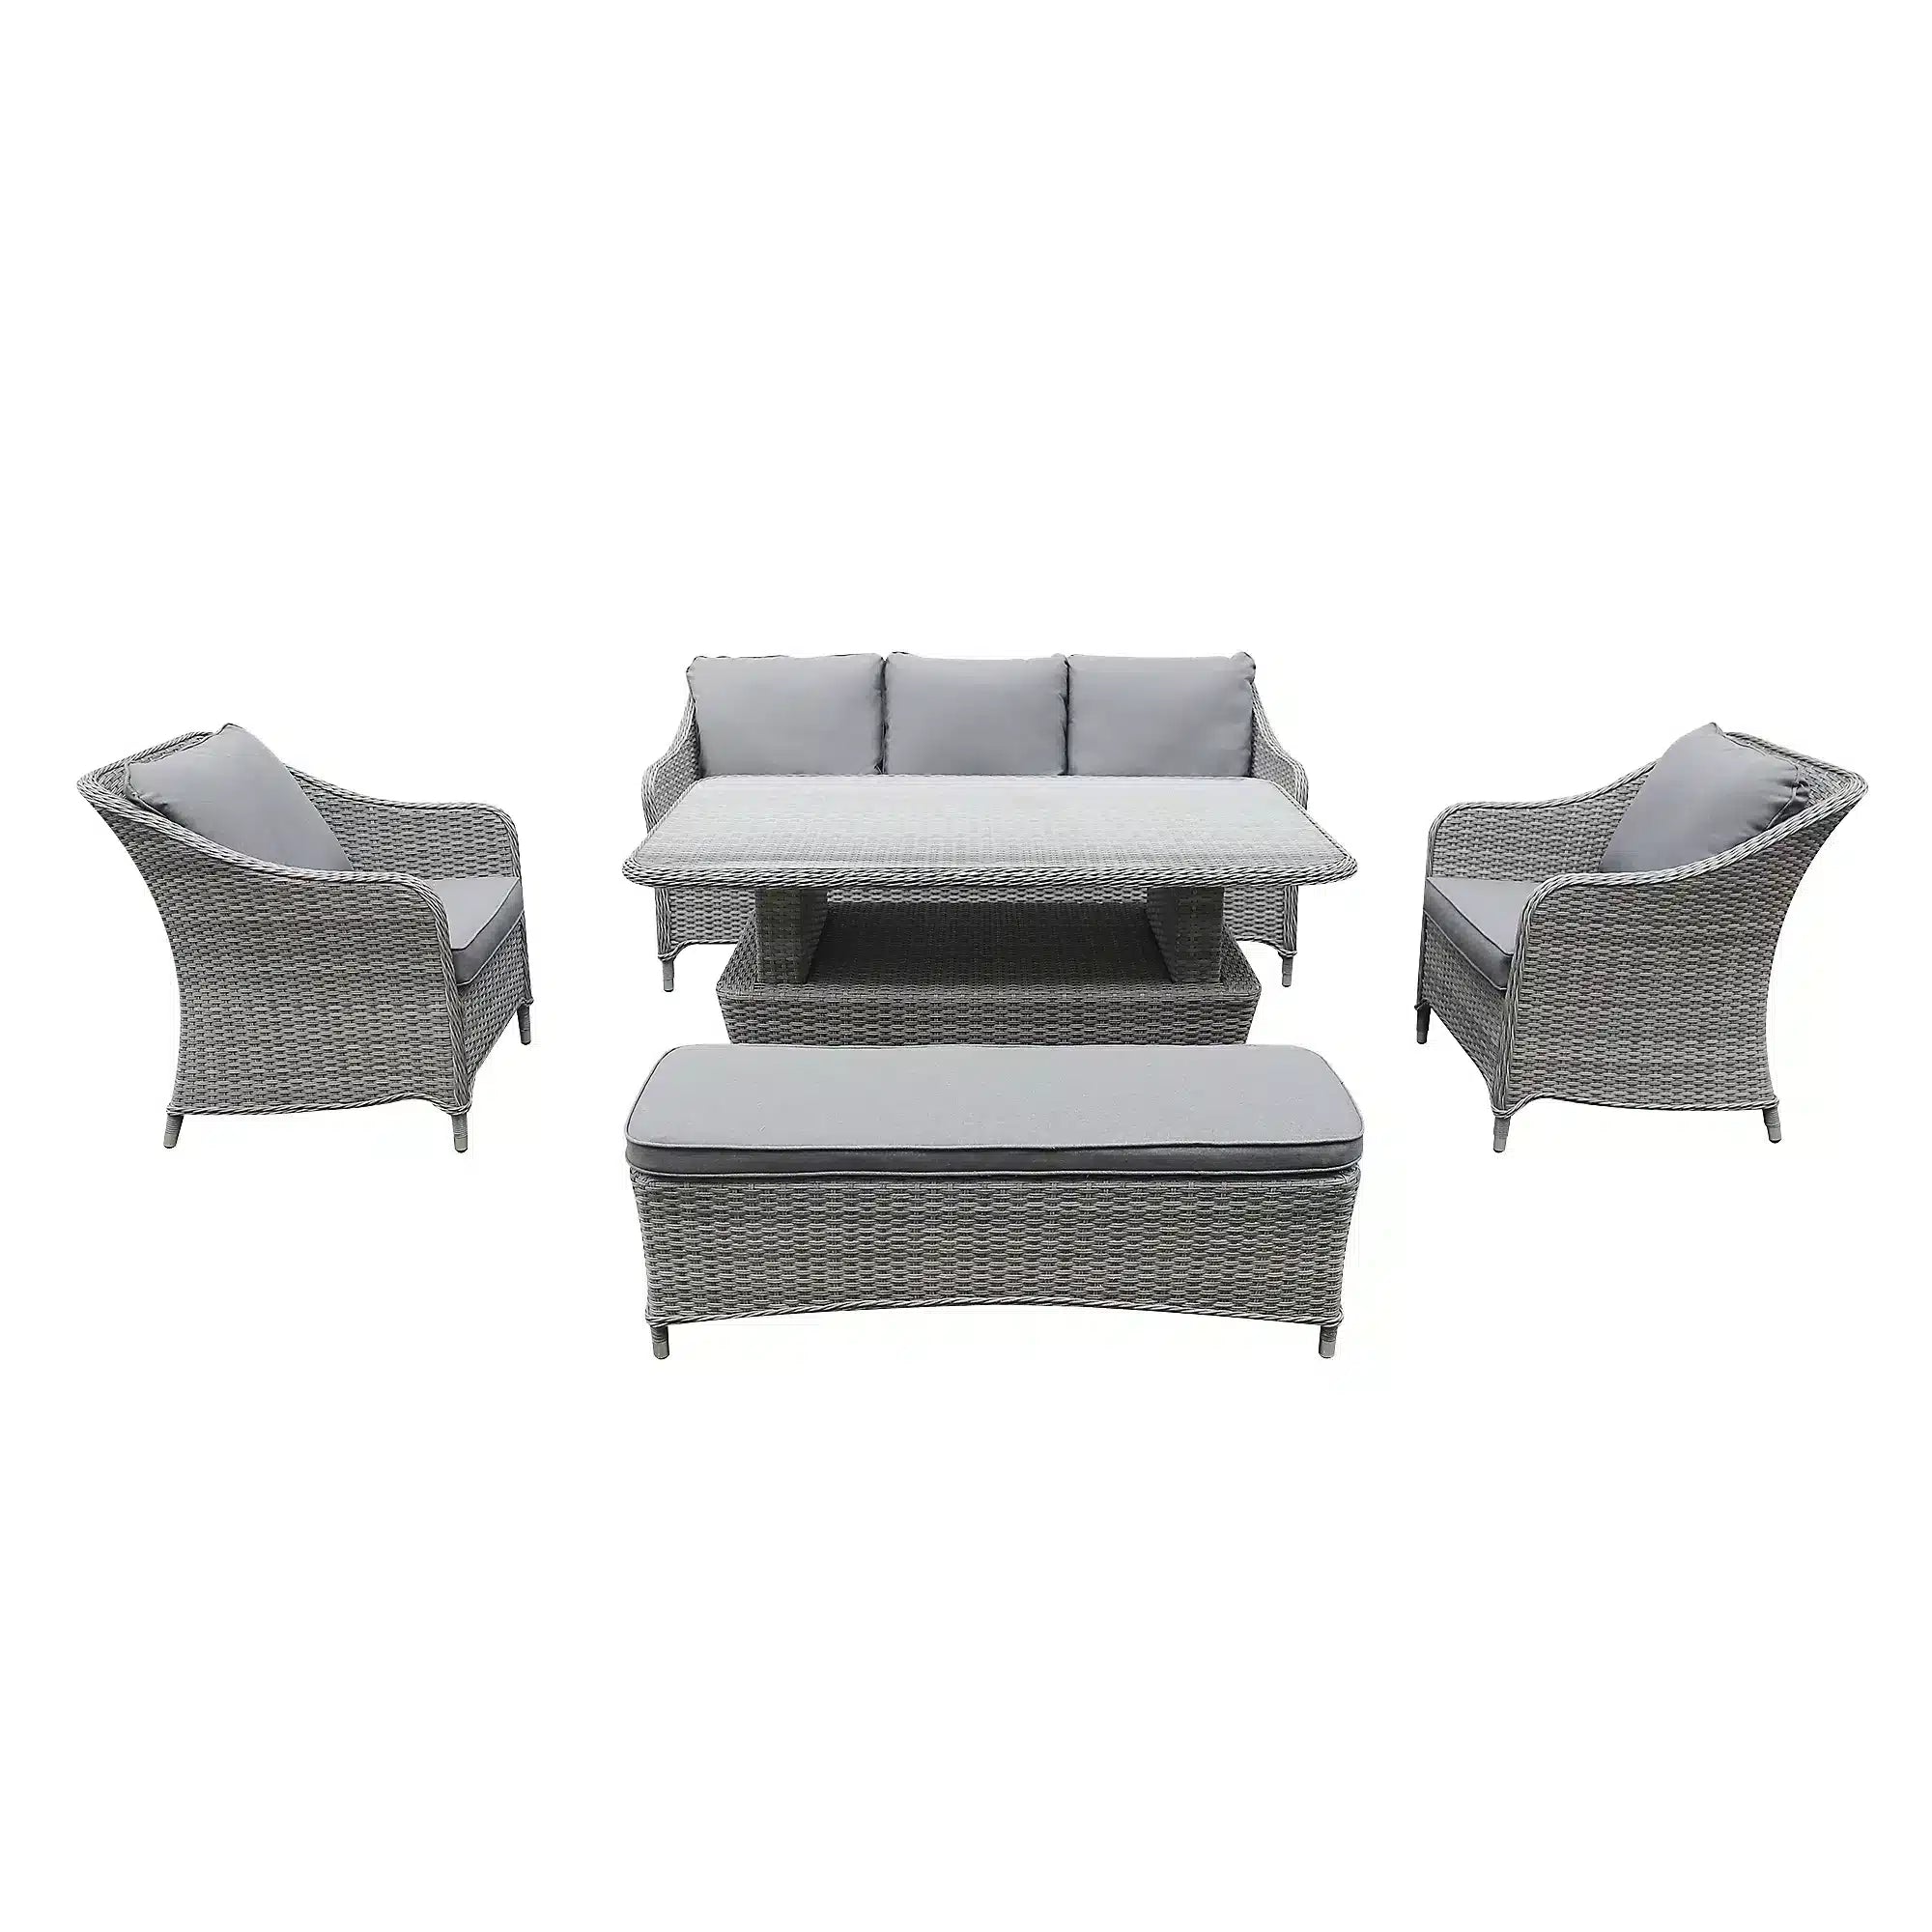 GoodHome Hamilton Steeple grey Rattan effect 7 Seater Garden furniture set - Table not included 2428